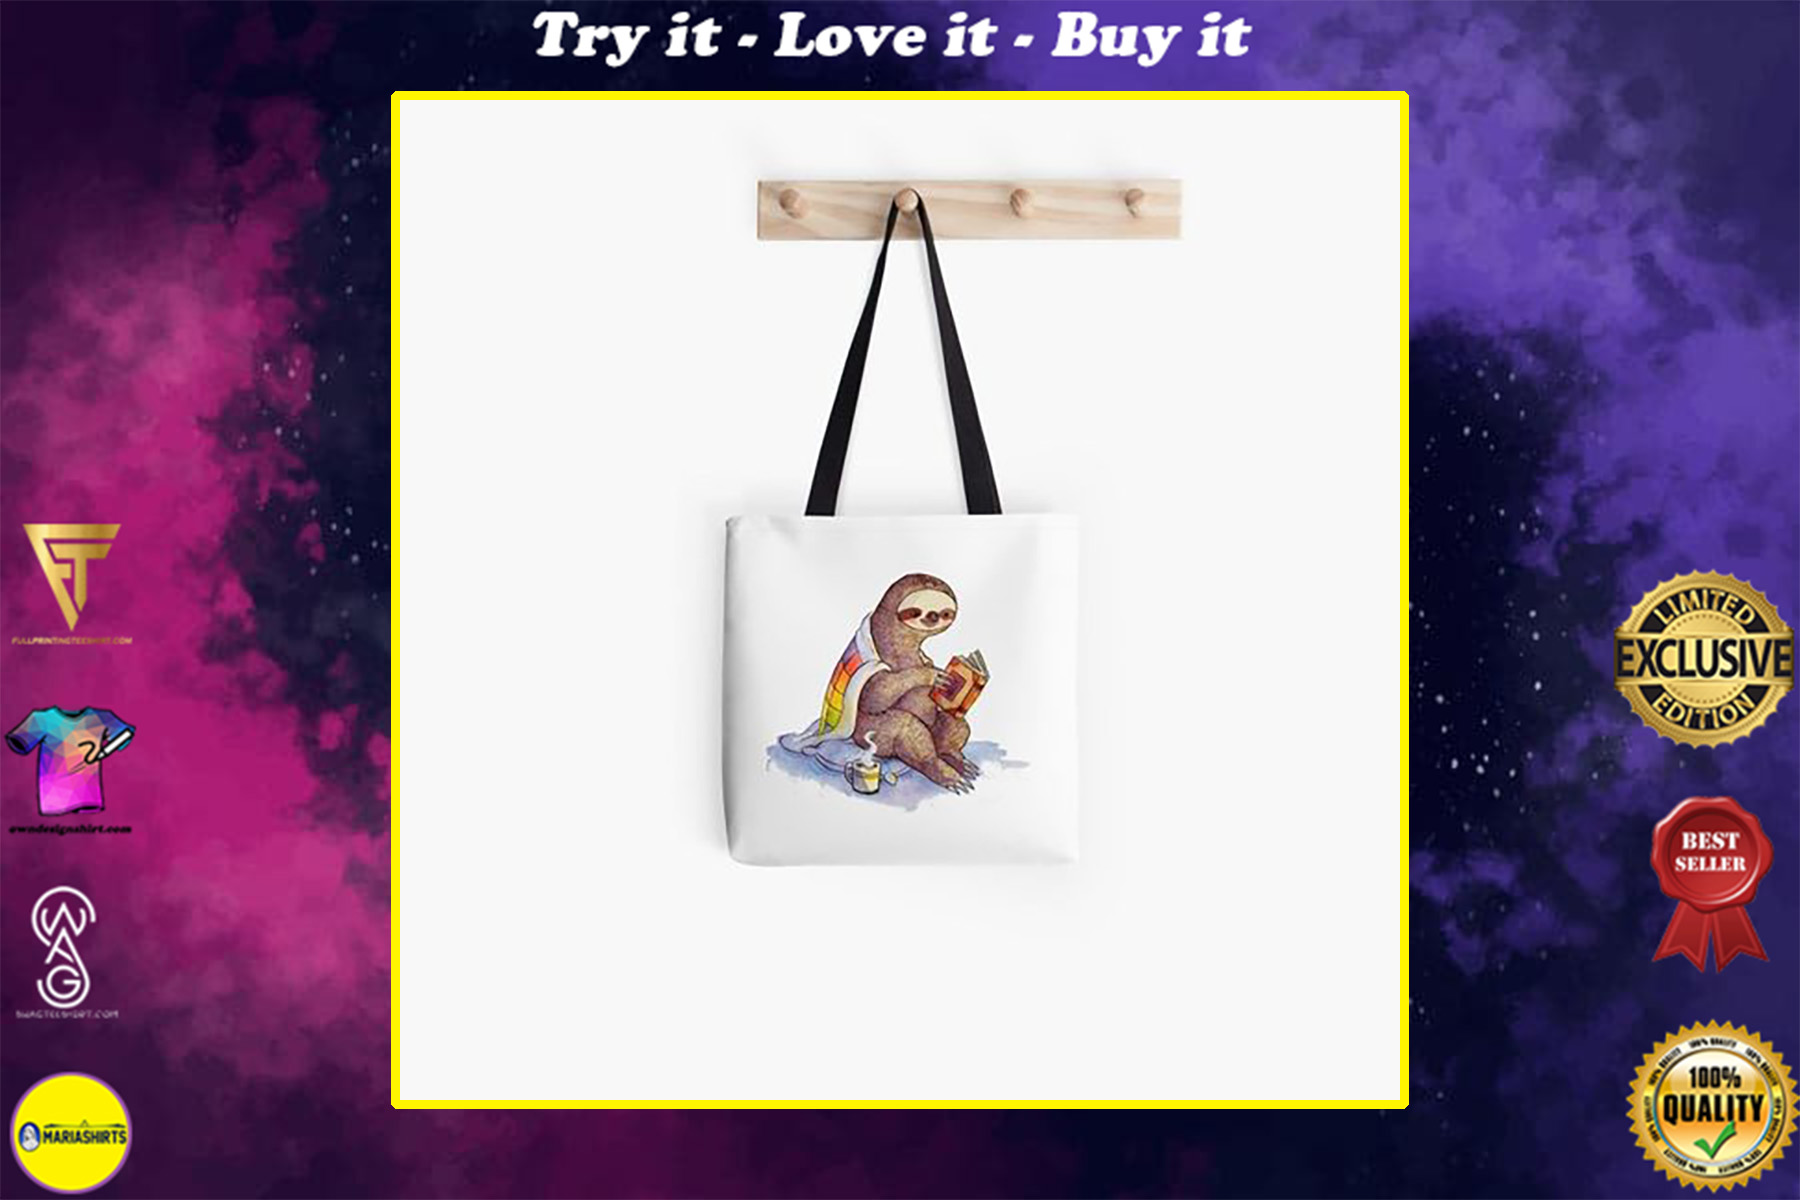 book lovers reading cozy sloth reads book all over printed tote bag